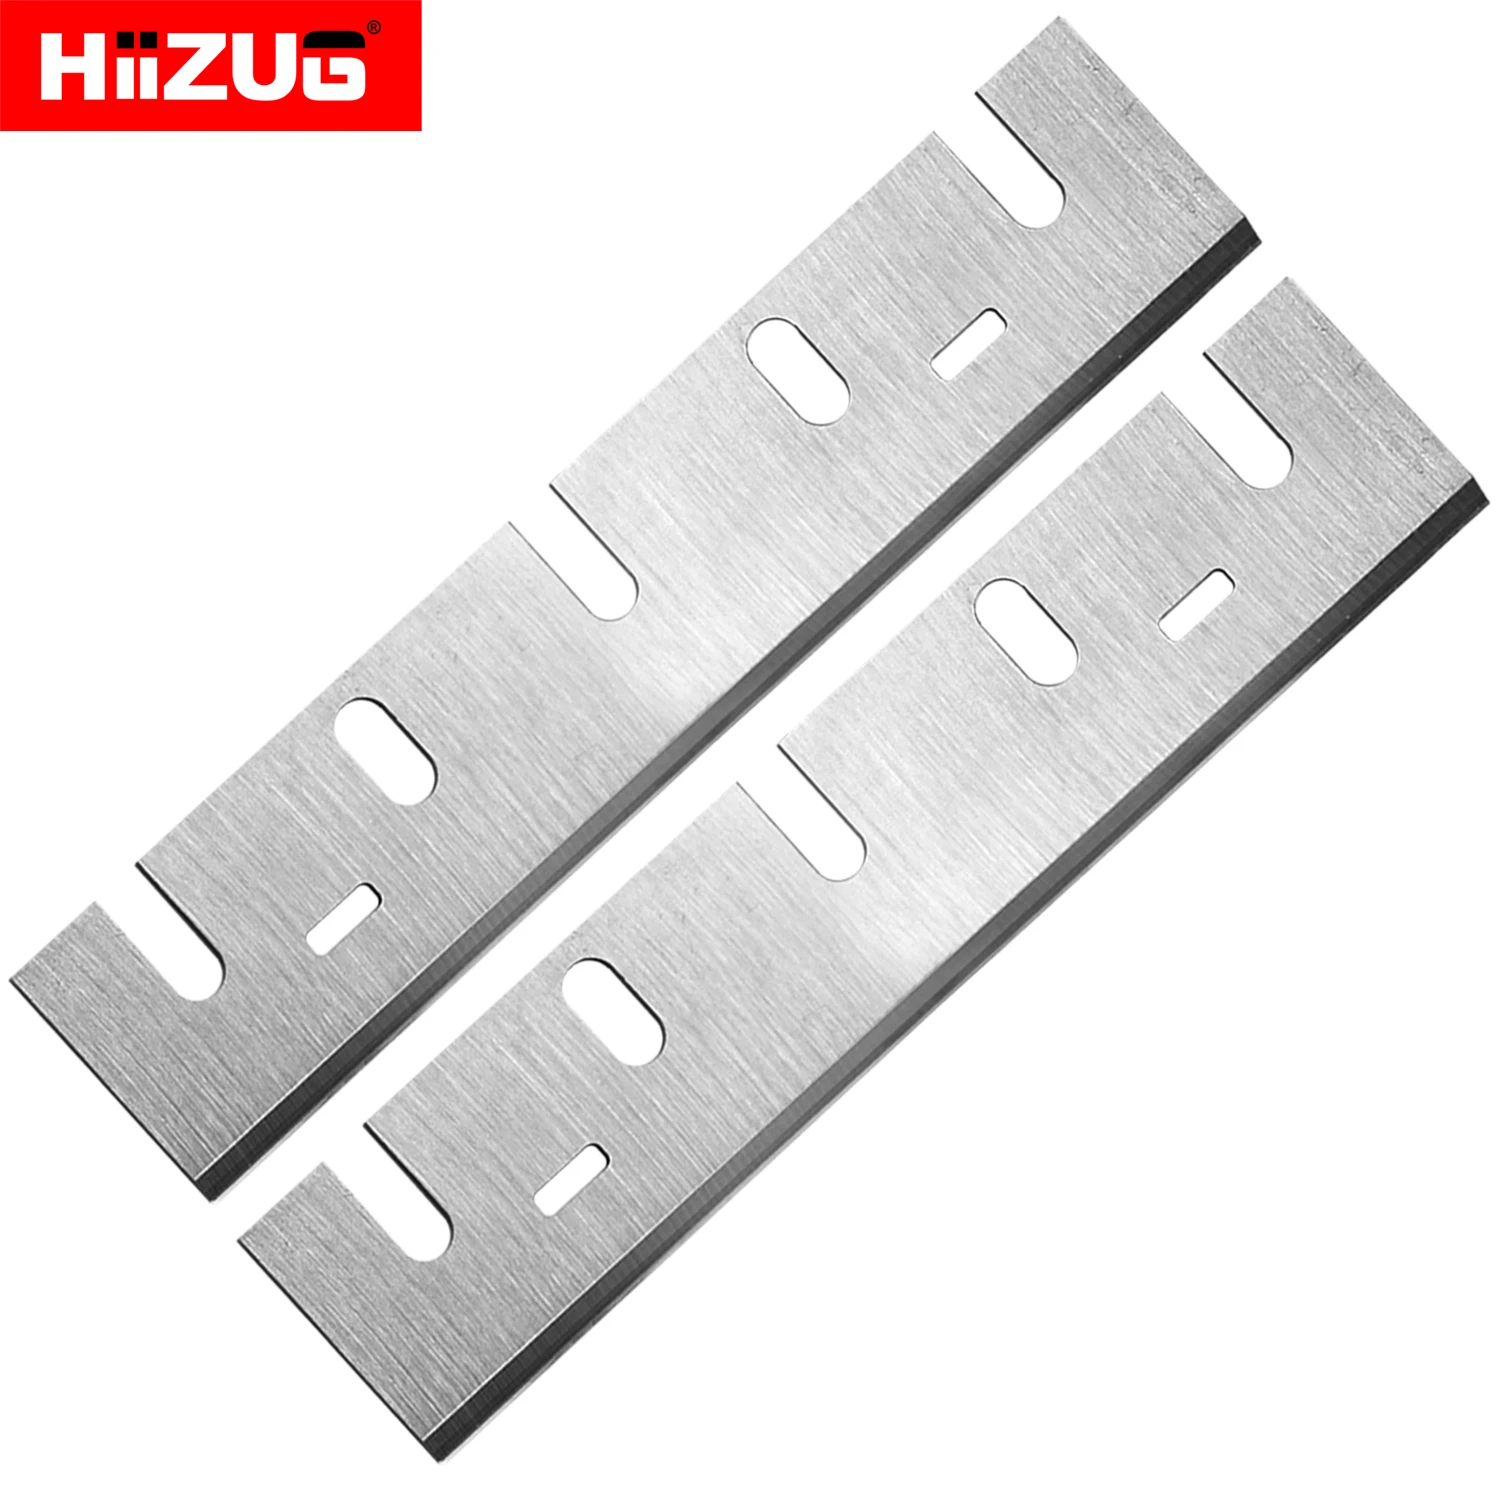 Makita 1806B Wood Planer Blades 6-3/4 Inch 170mm High Speed Steel Set of 2 Pieces 13 inch 333×25×3mm planer blades knives for planer jointer thicknesser machines set of 3 pieces